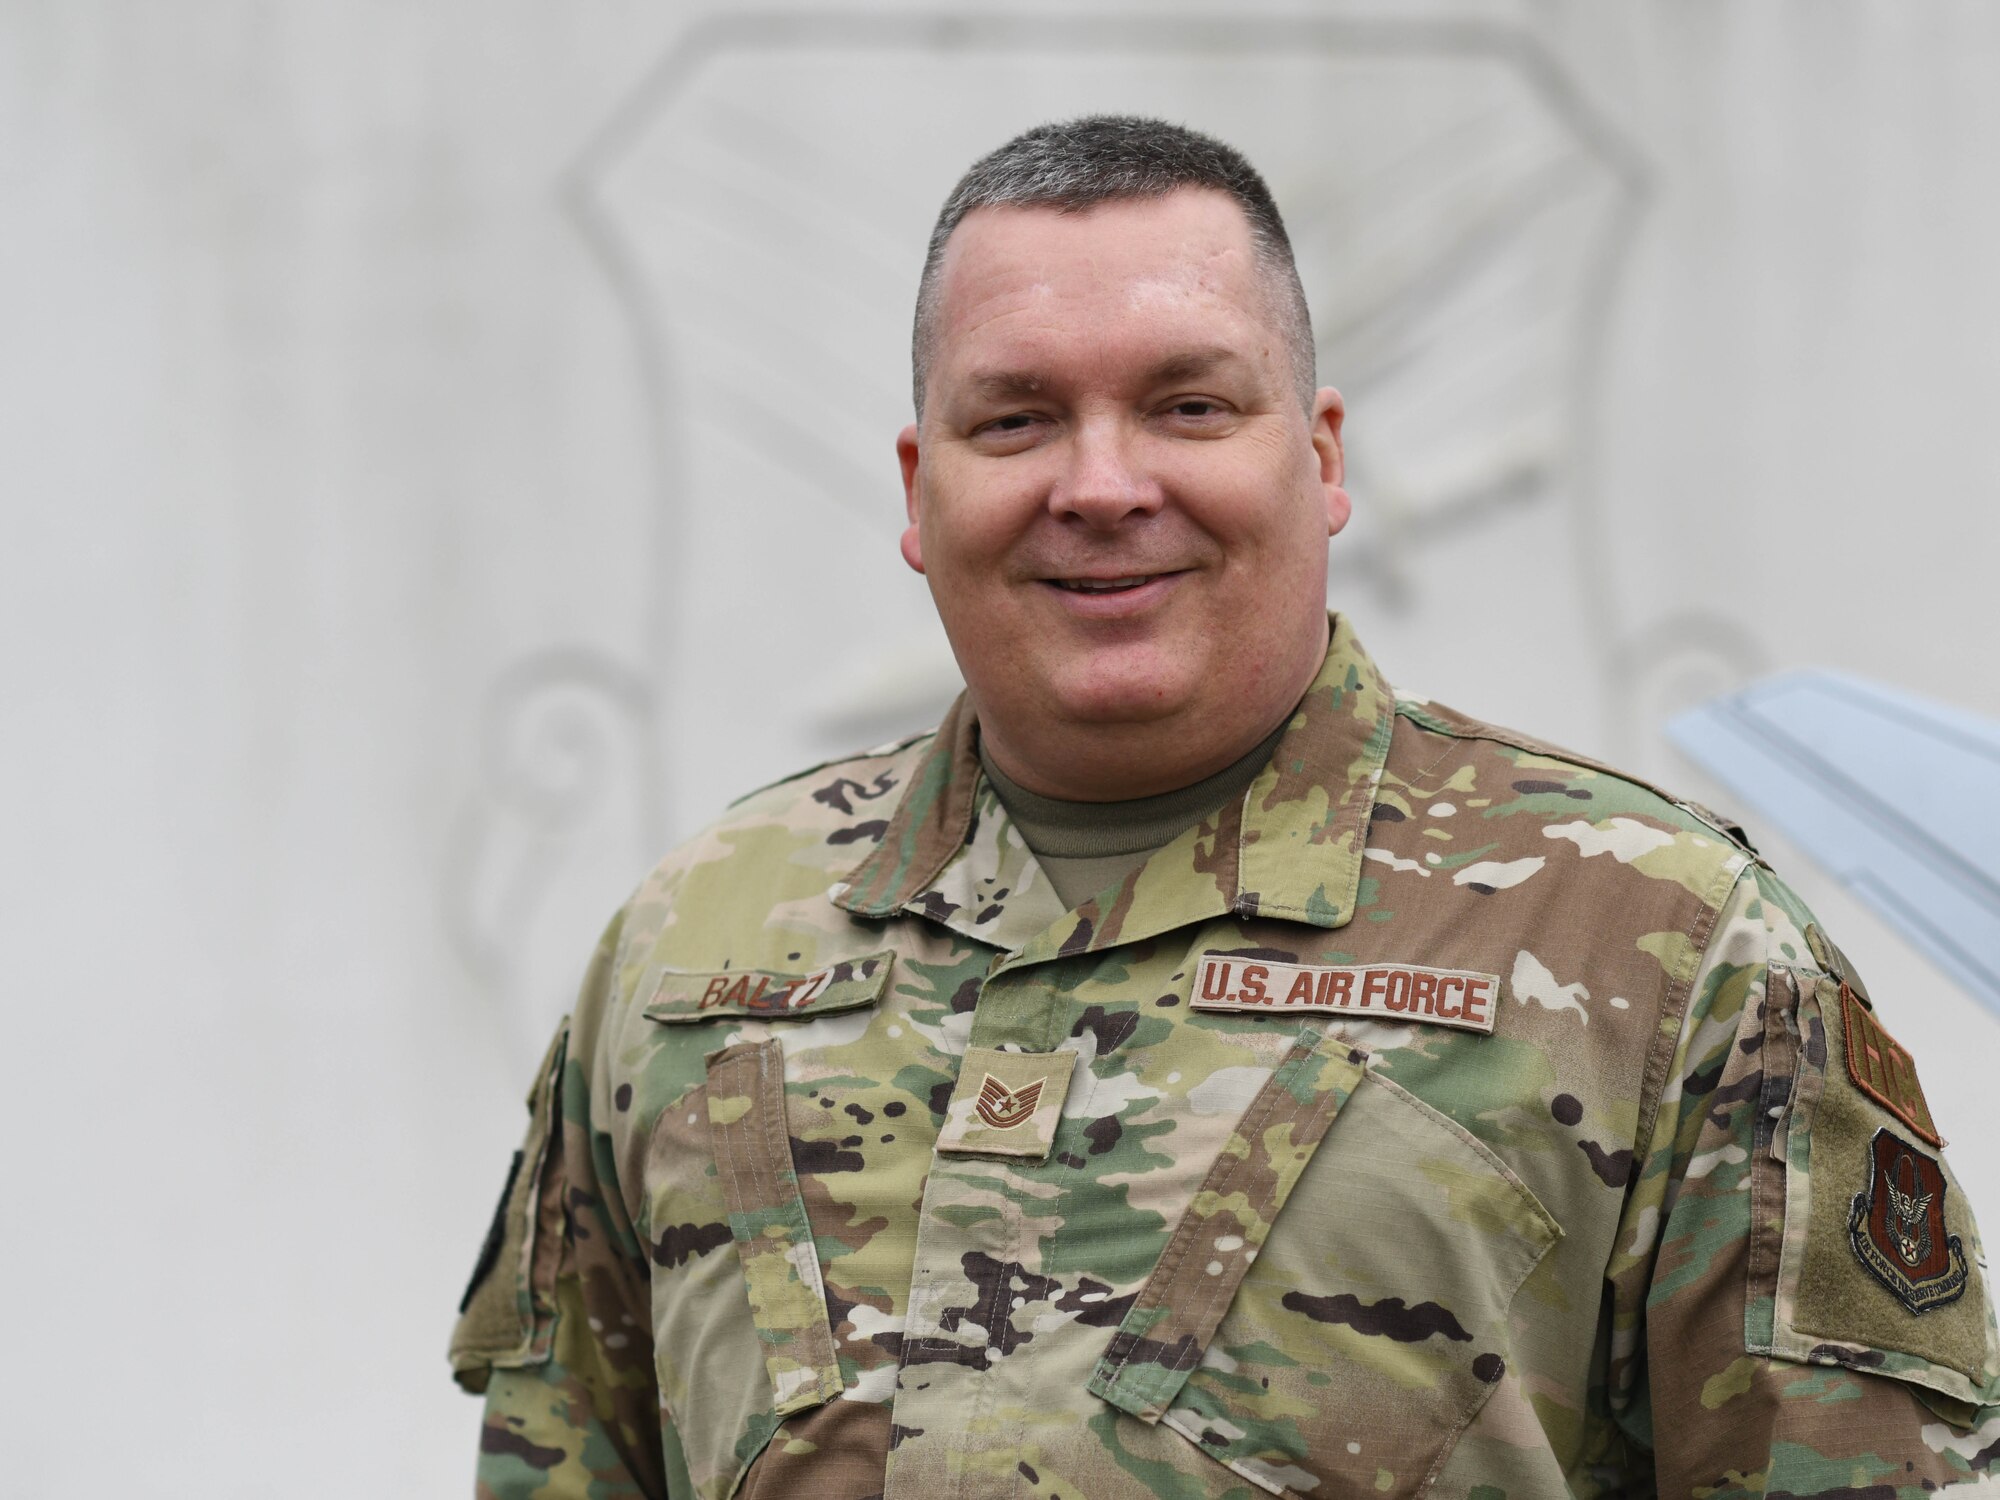 Tech. Sgt. John Baltz, noncommissioned officer in charge of Chapel operations, poses for a photo at the entrance to Youngstown Air Reserve Station, Ohio, on March 2, 2024.